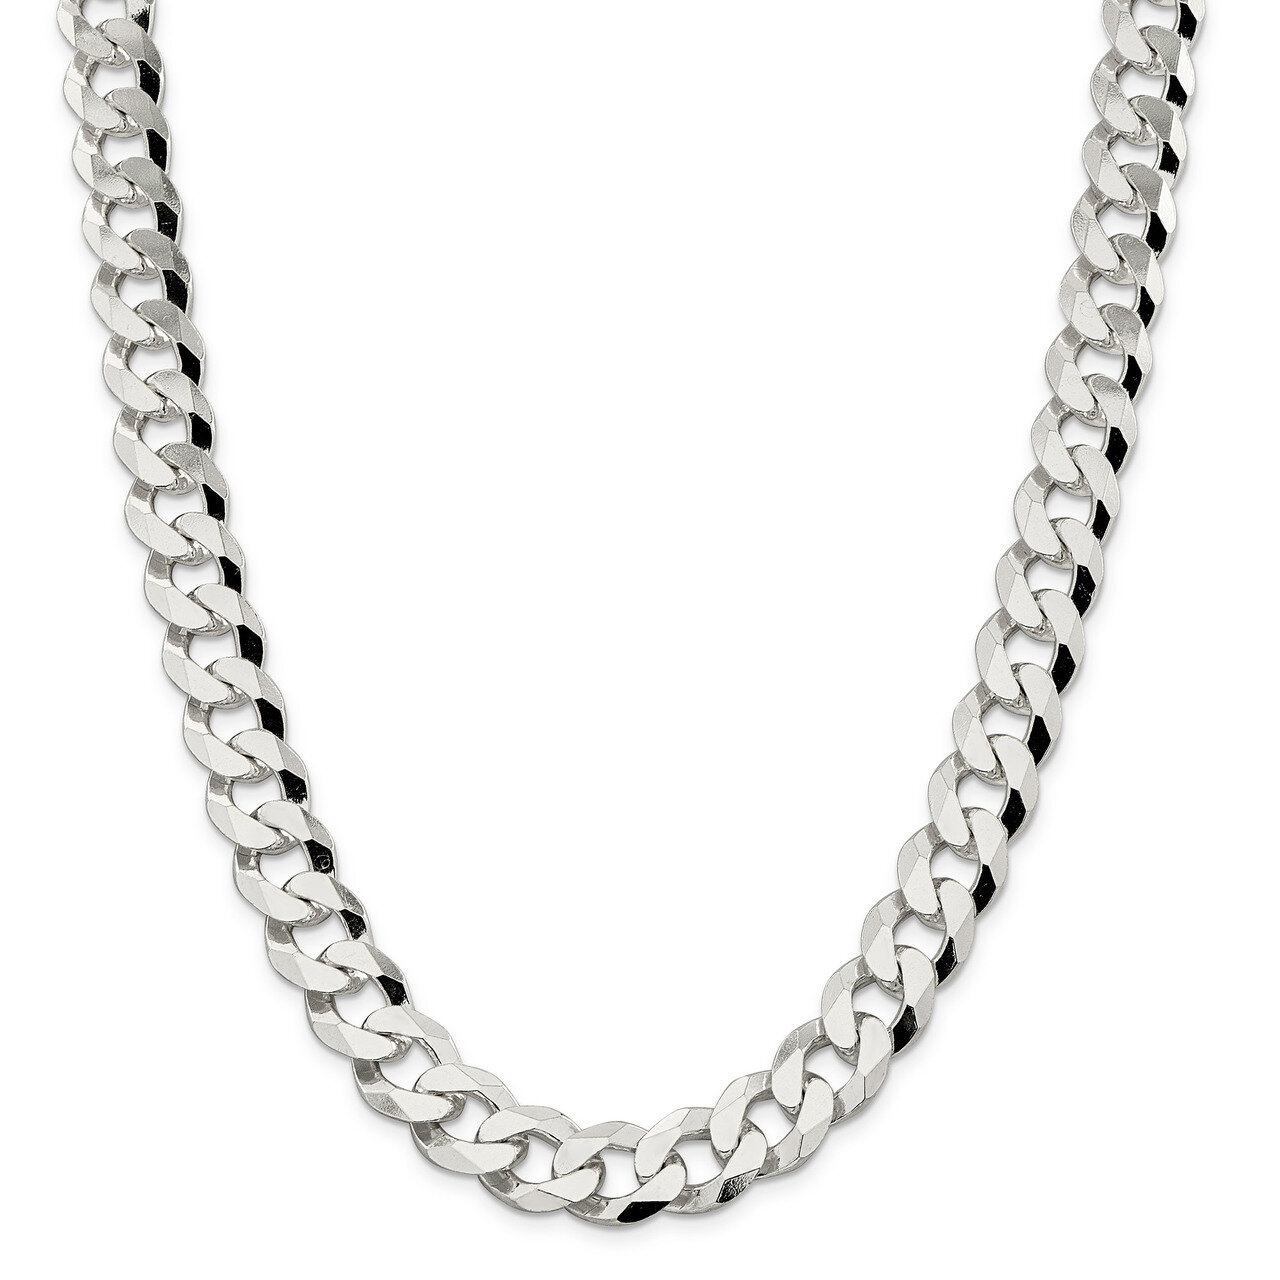 20 Inch 14mm Beveled Curb Chain Sterling Silver QFB350-20